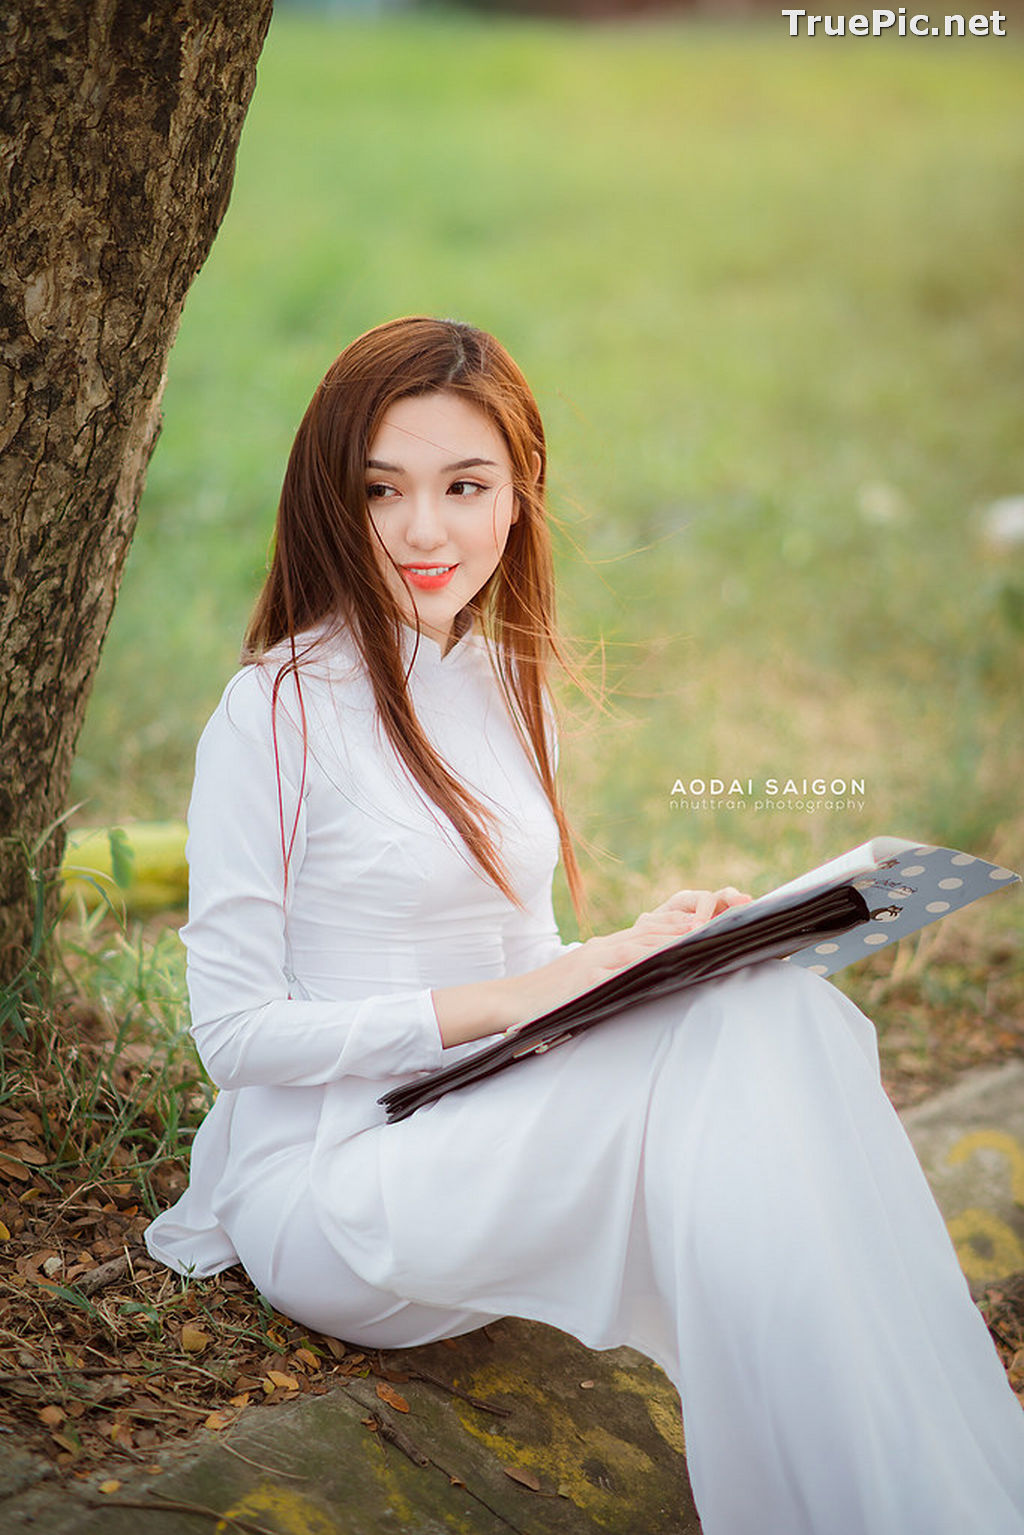 Image The Beauty of Vietnamese Girls with Traditional Dress (Ao Dai) #5 - TruePic.net - Picture-51